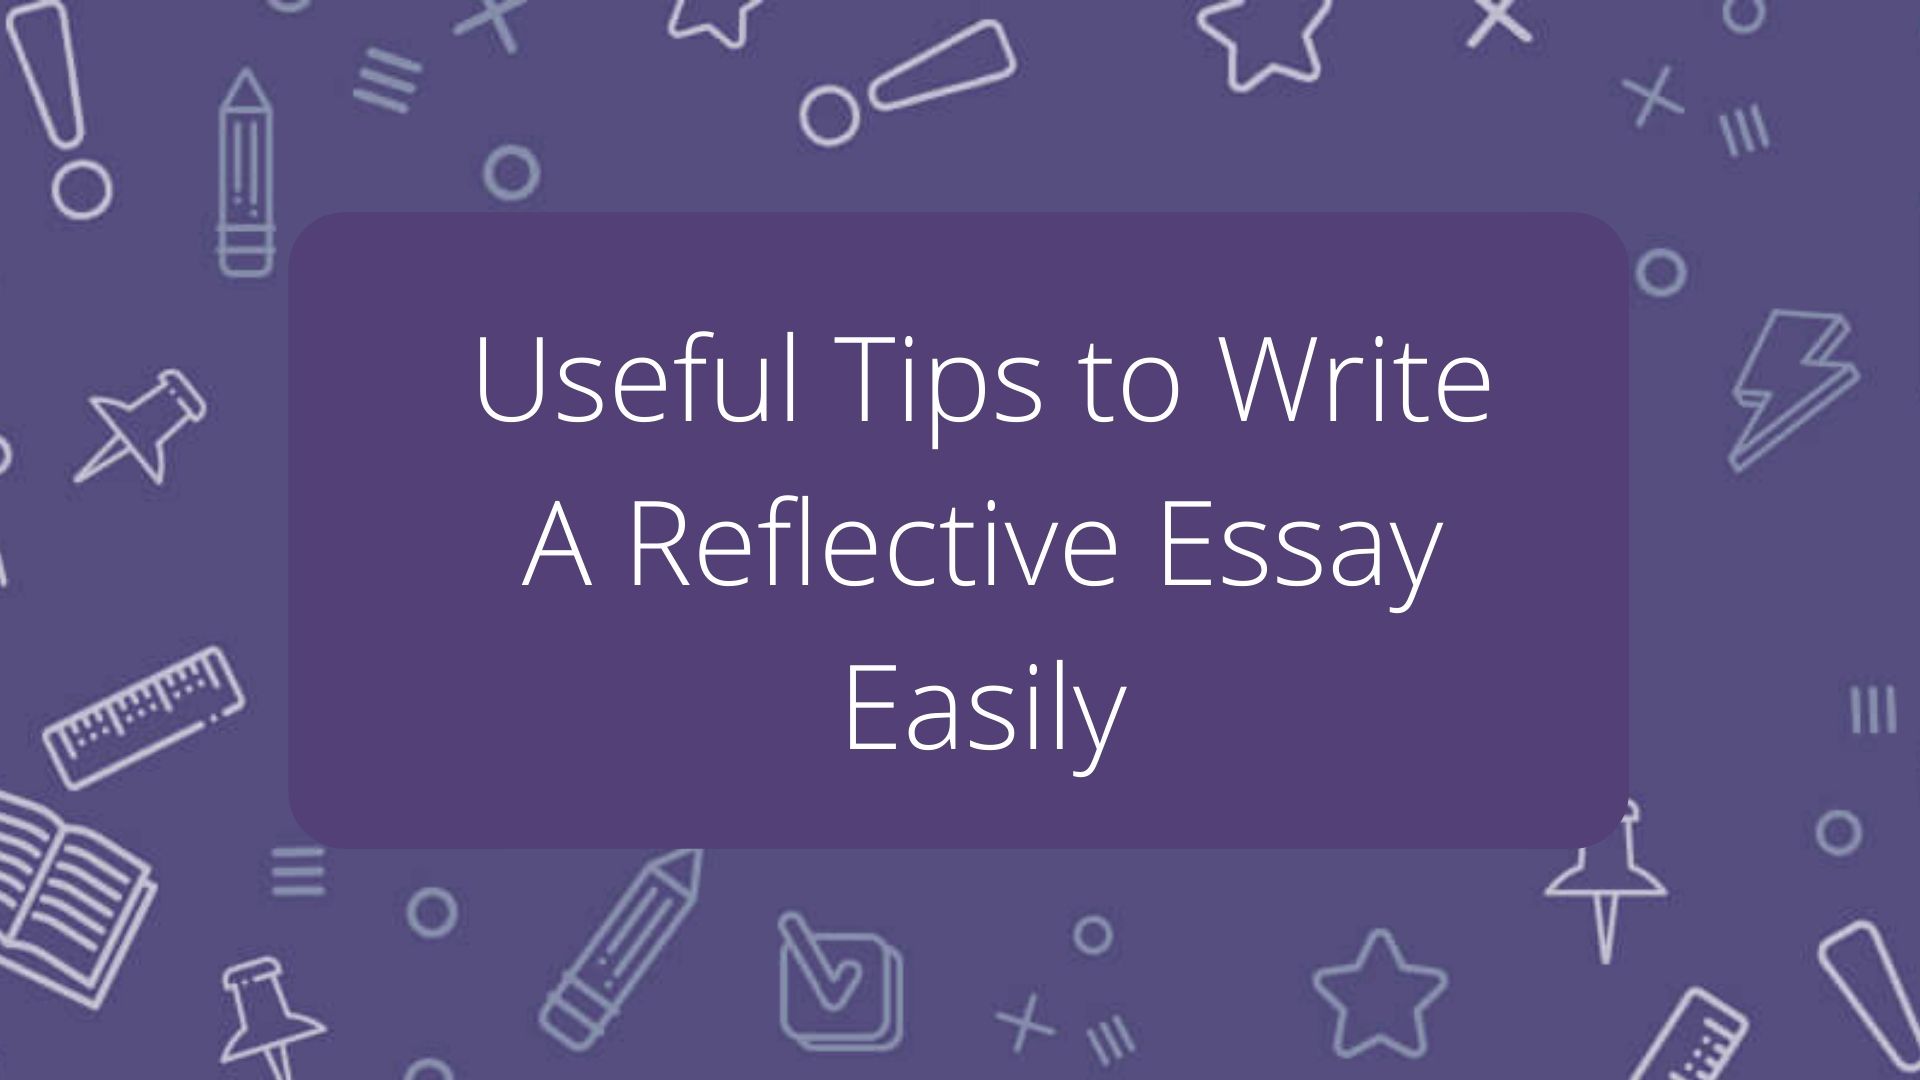 Useful Tips to Write A Reflective Essay Easily